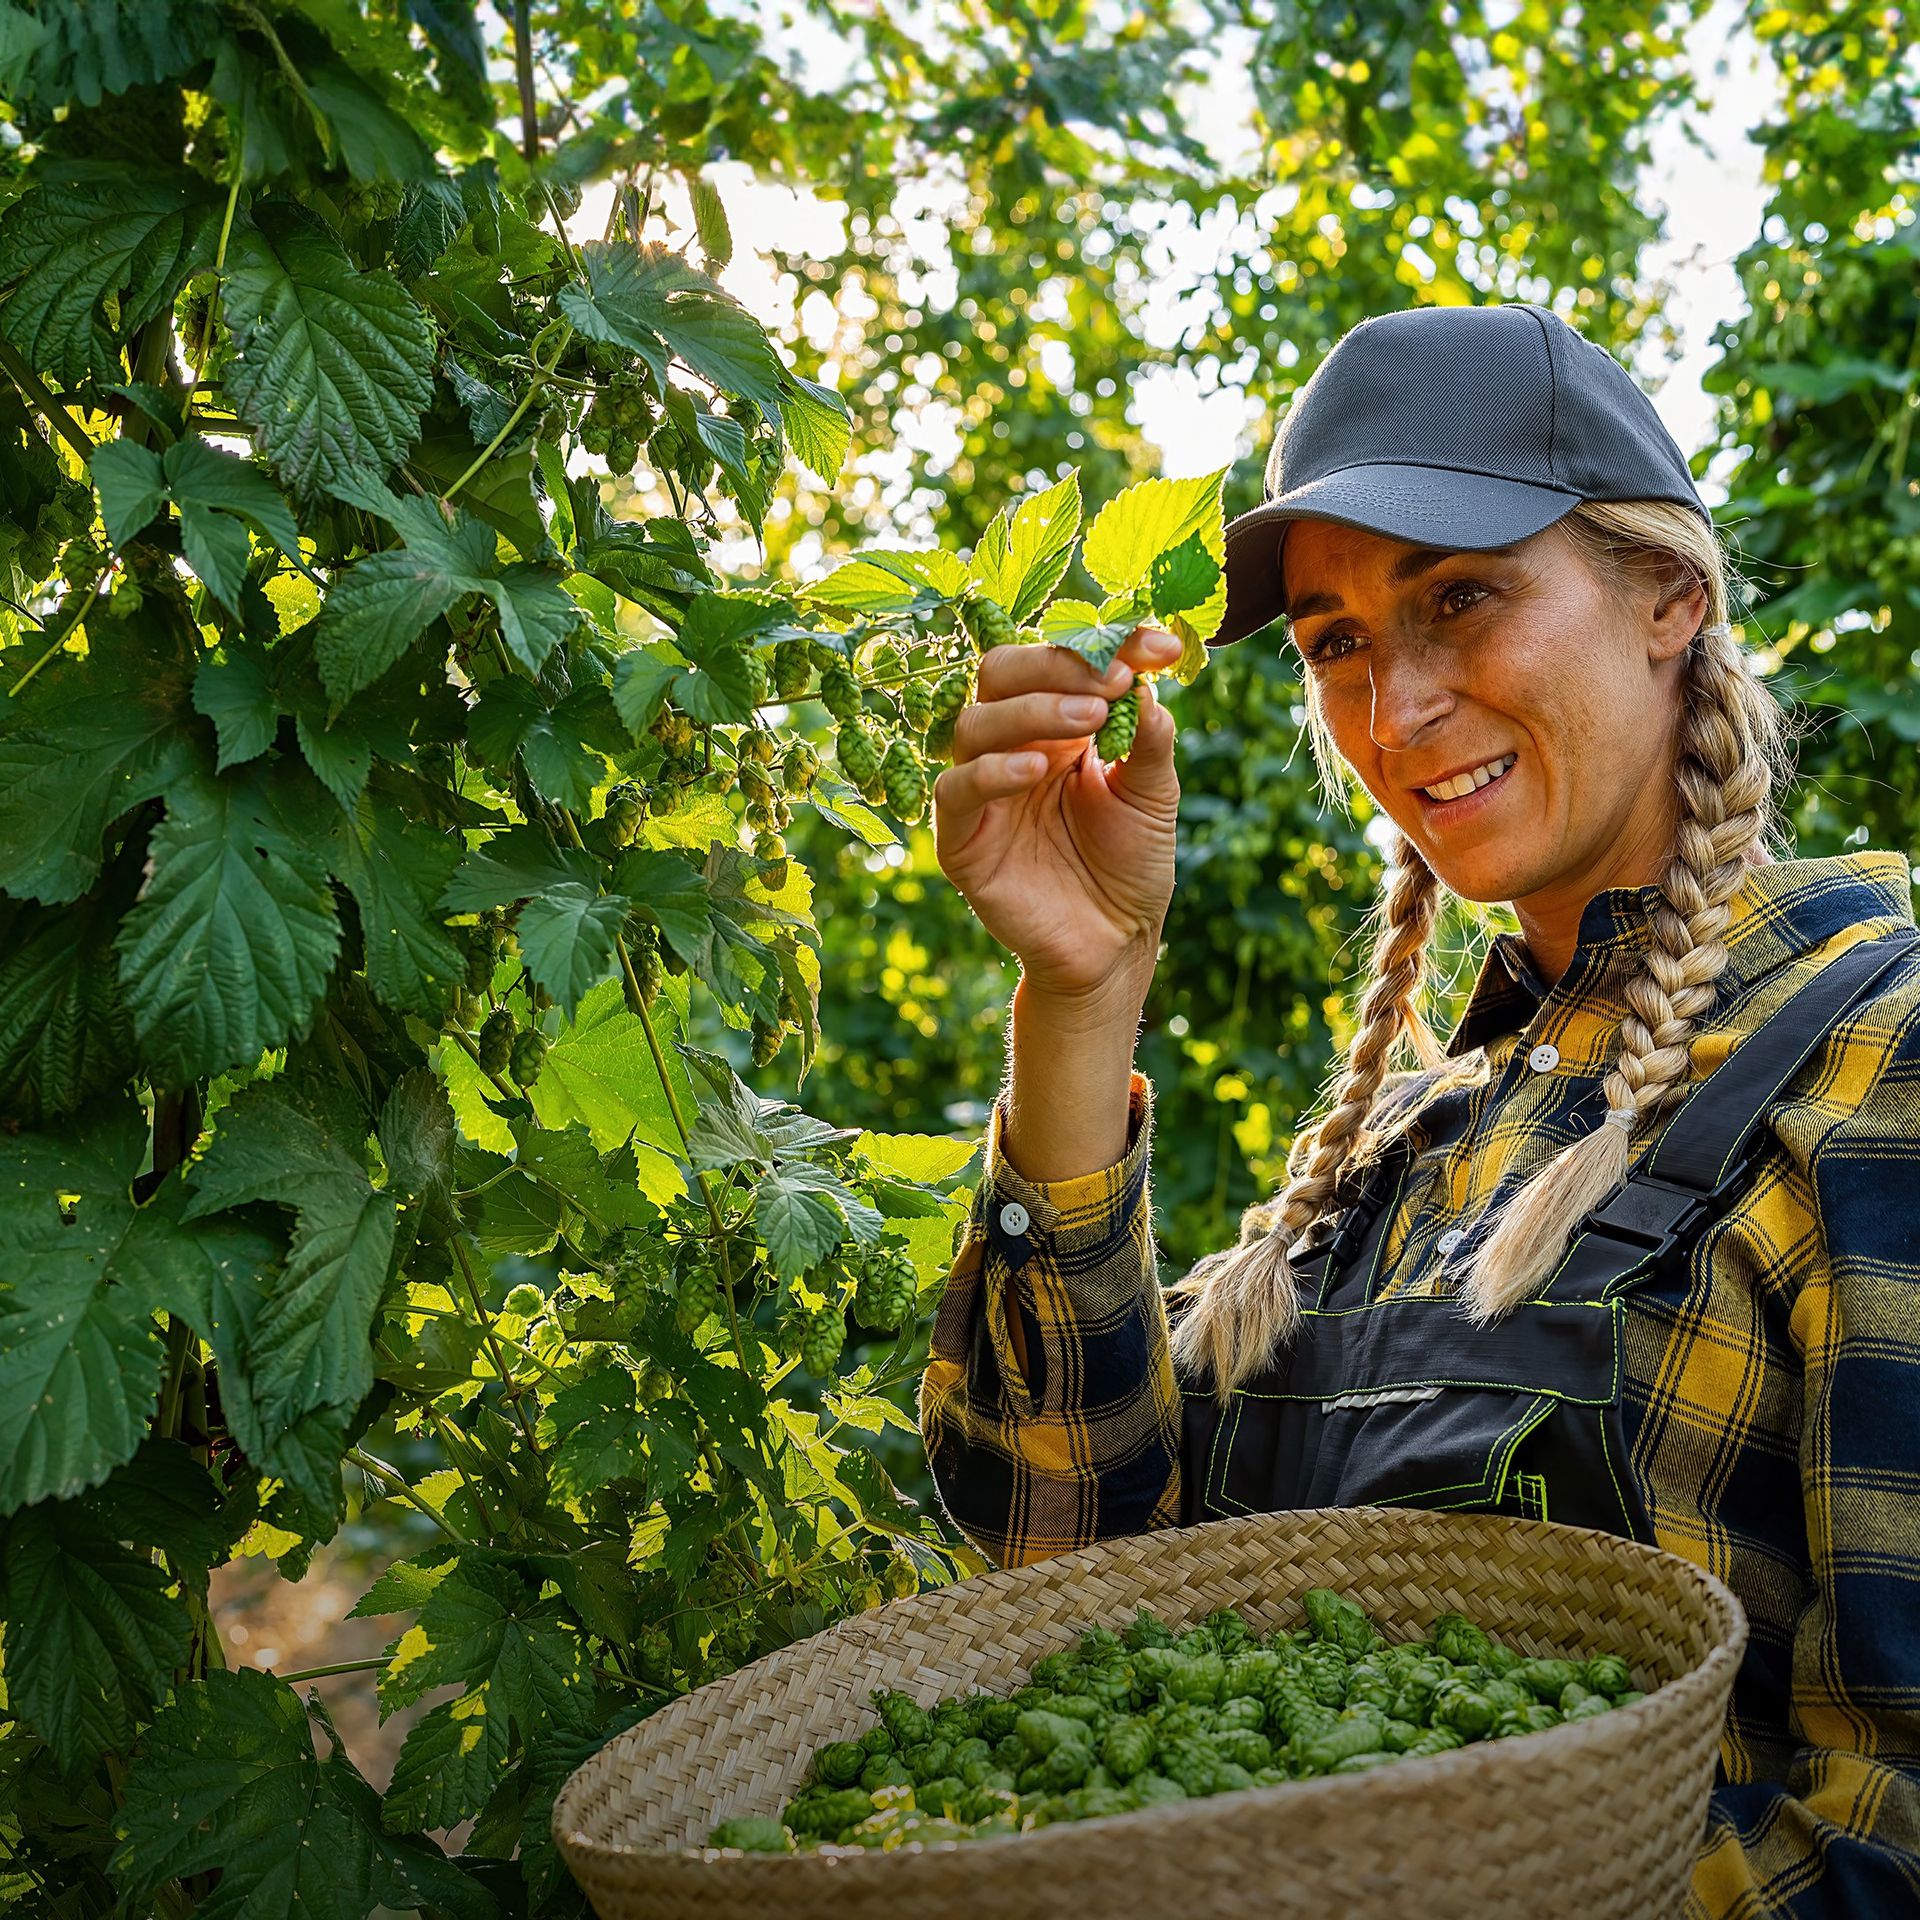 Image of a producer checking and harvesting hops in the field